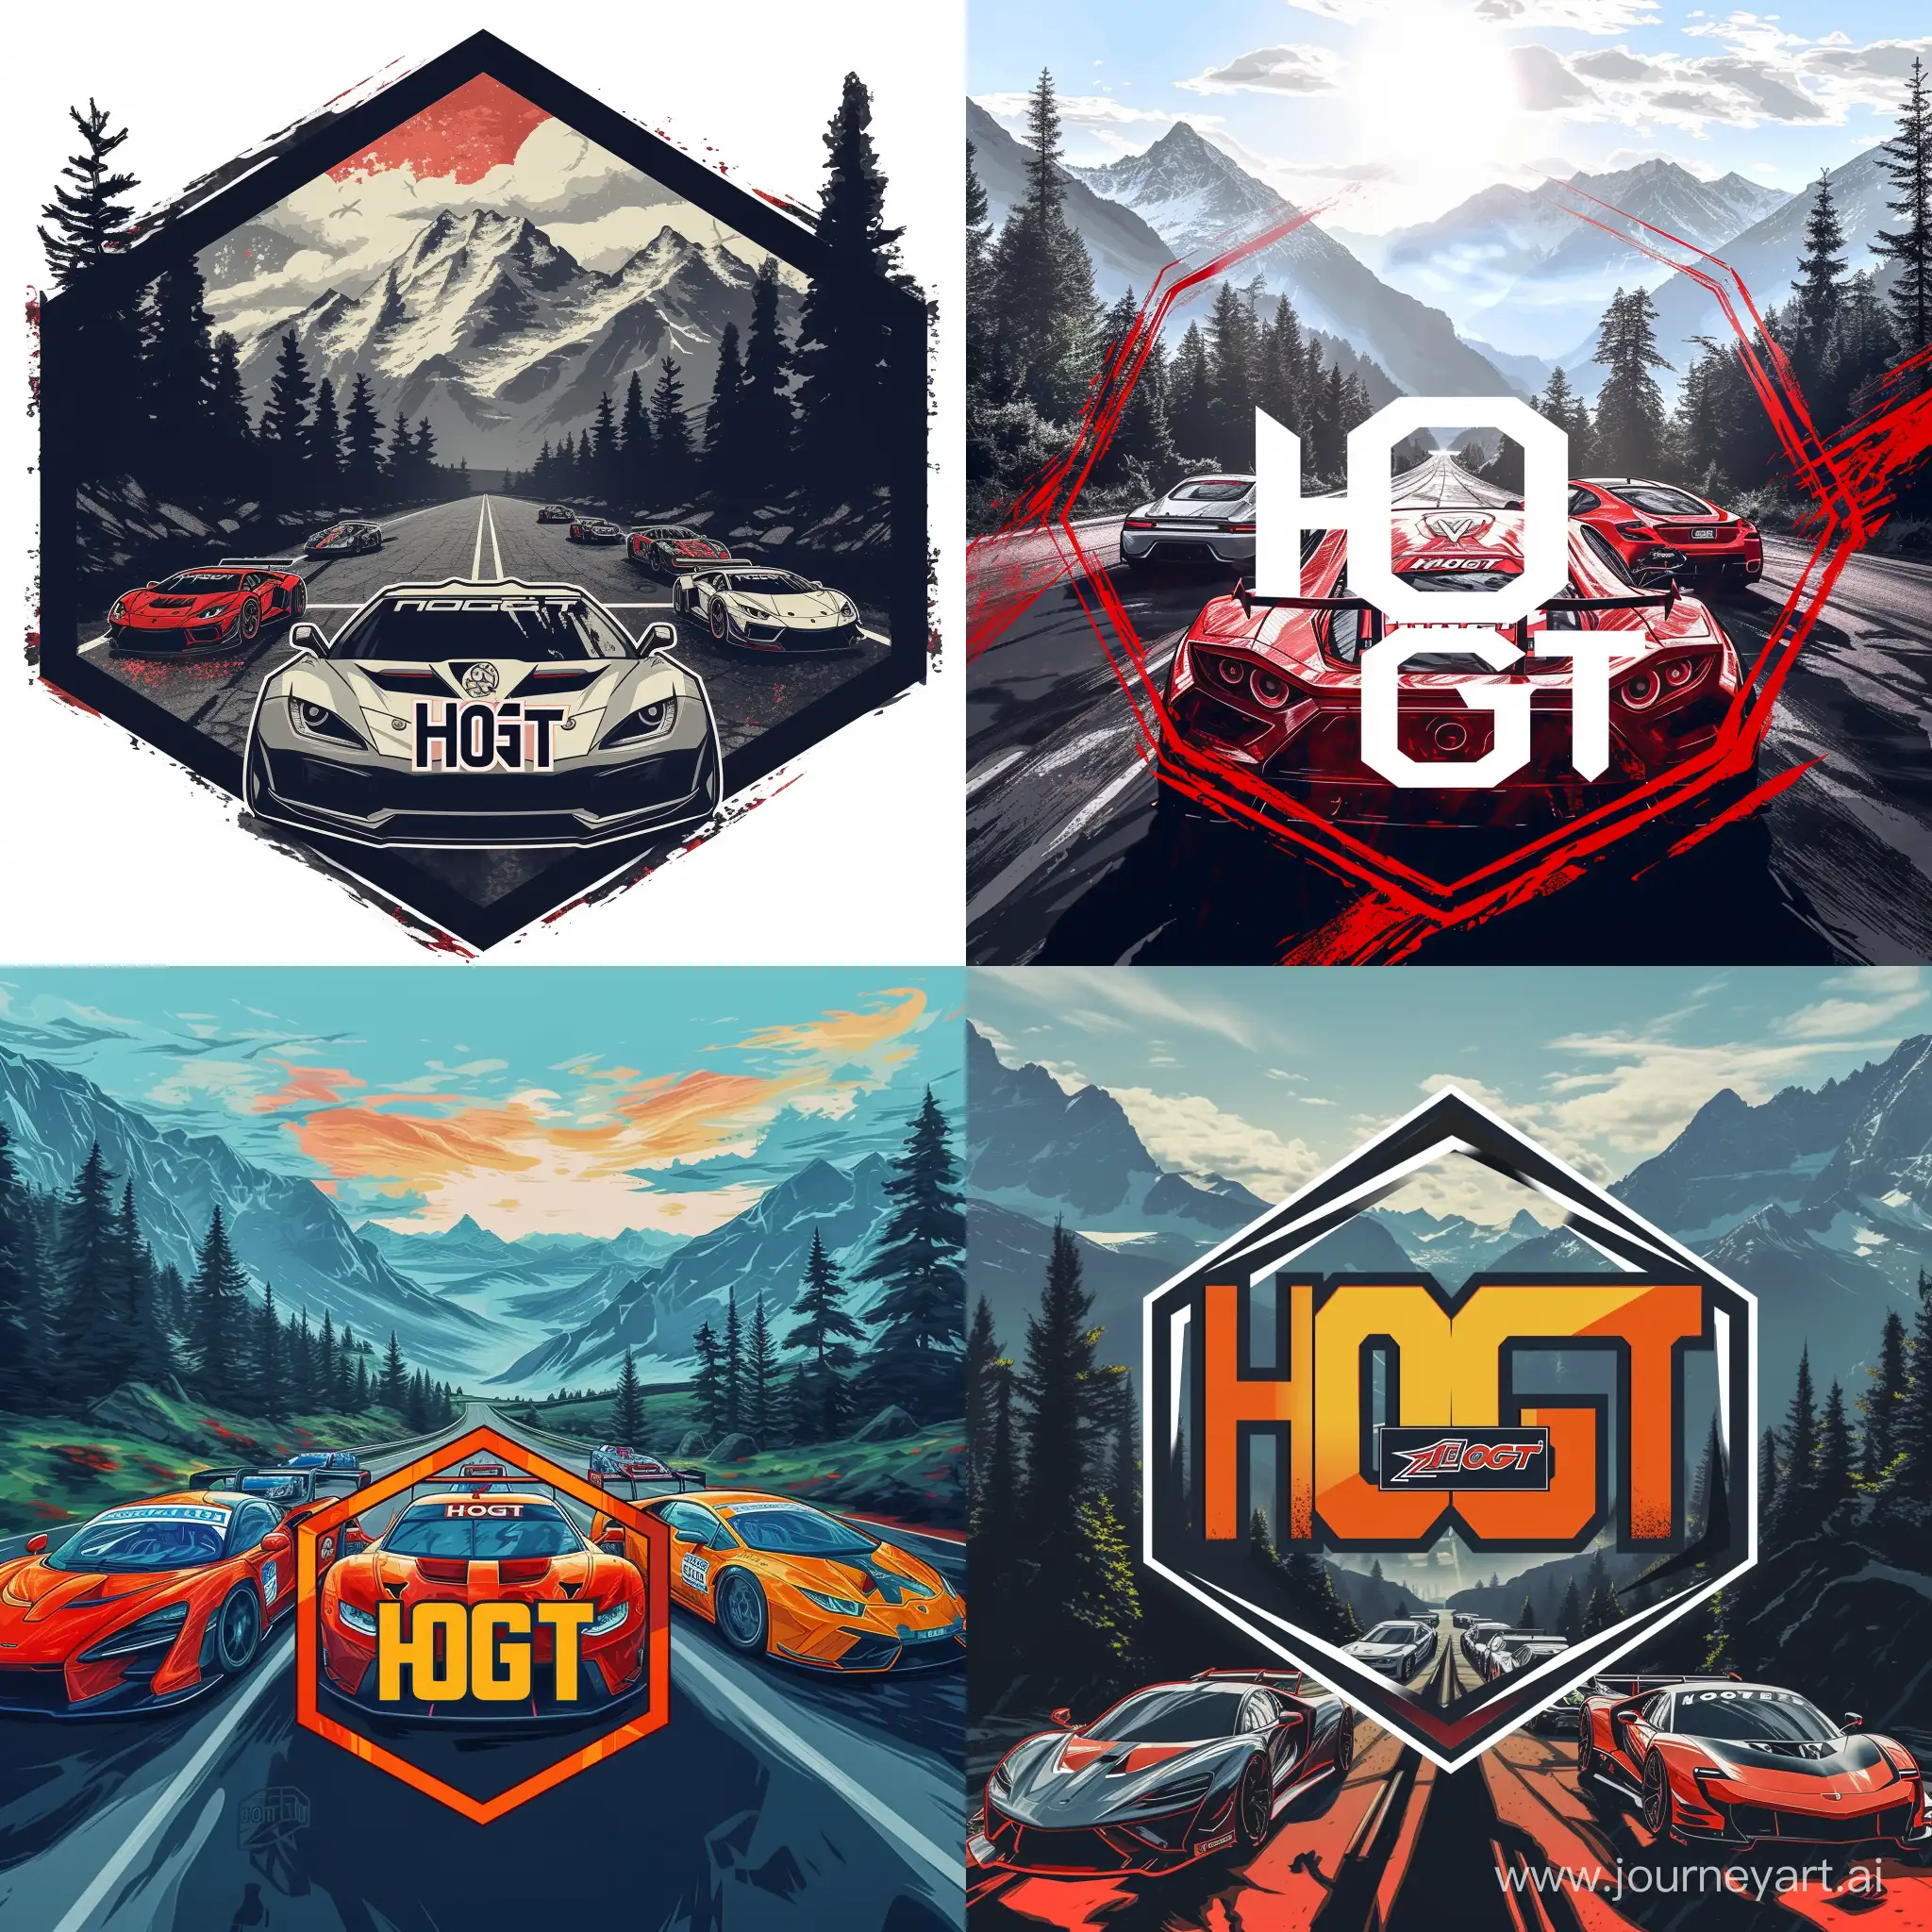 draw style car race logo in octagon shape, some racing cars,
with HoGT tag in the middle, mountains with trees with road in backround